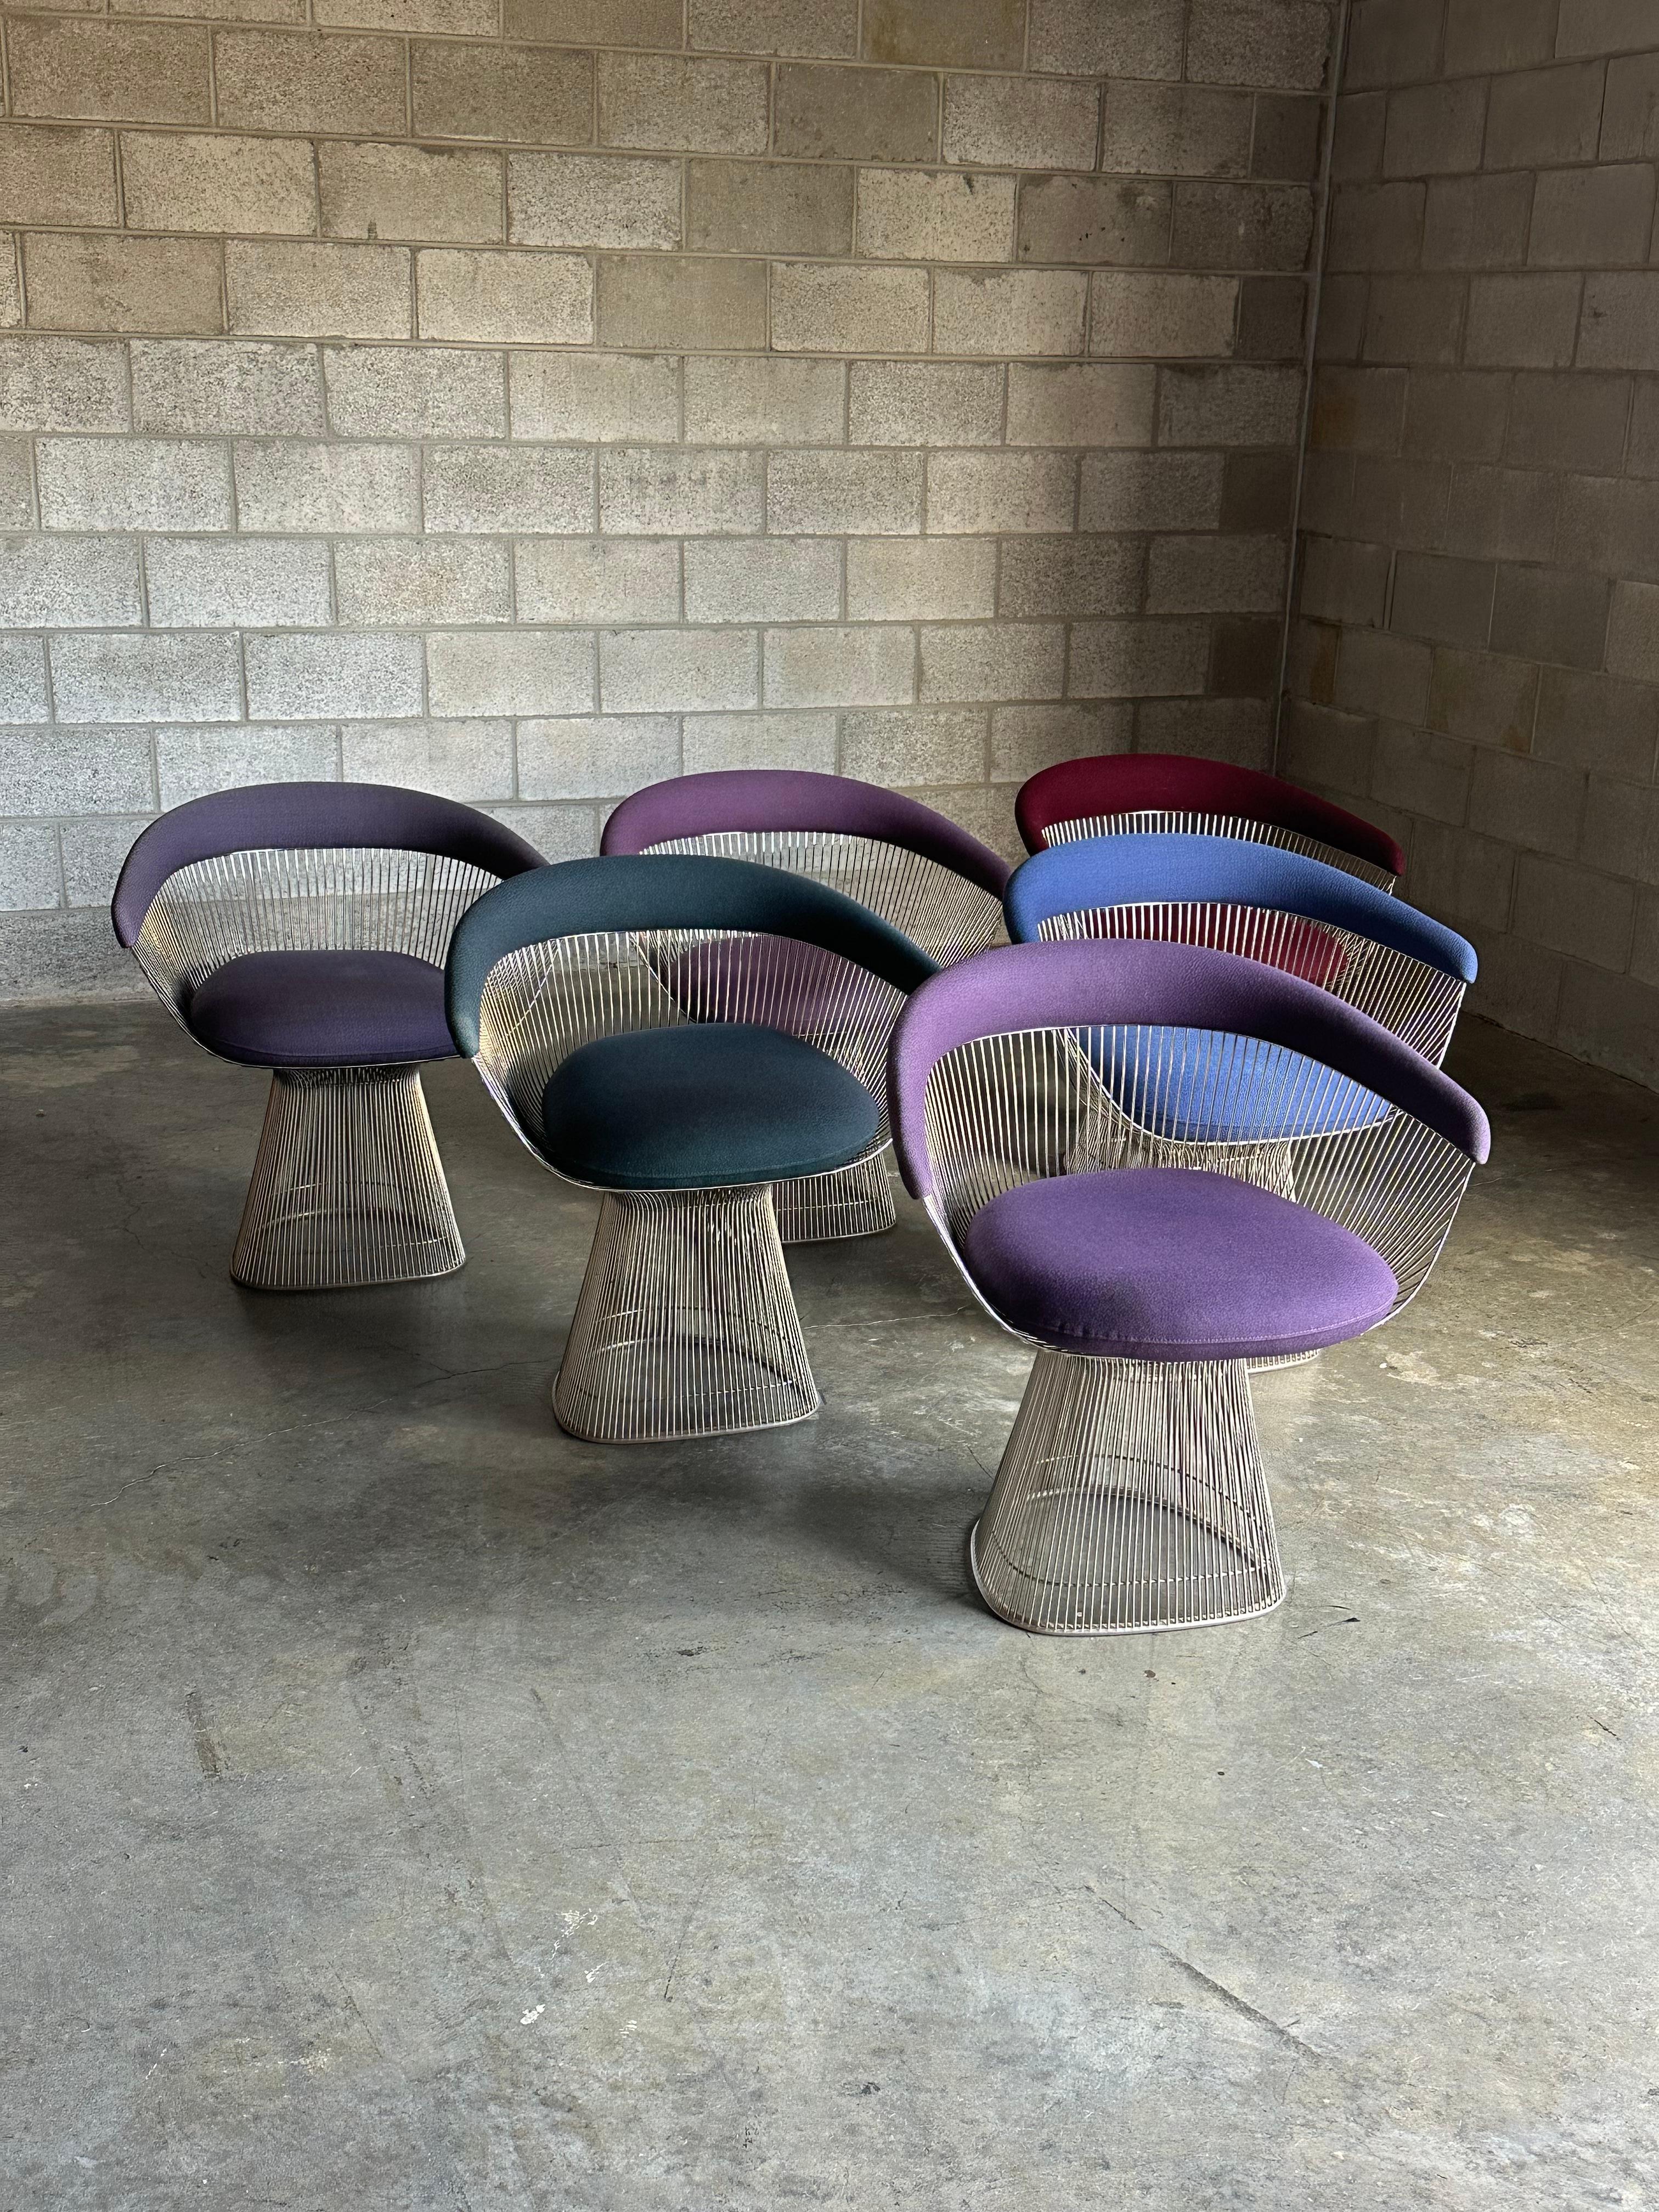 A set of 6 arm chairs by Warren Platner for Knoll. One of the most iconic designs of the midcentury- so much so that they are sold to this day (starting at over $4,500 each). Here is an opportunity to acquire a set that is certainly usable in the